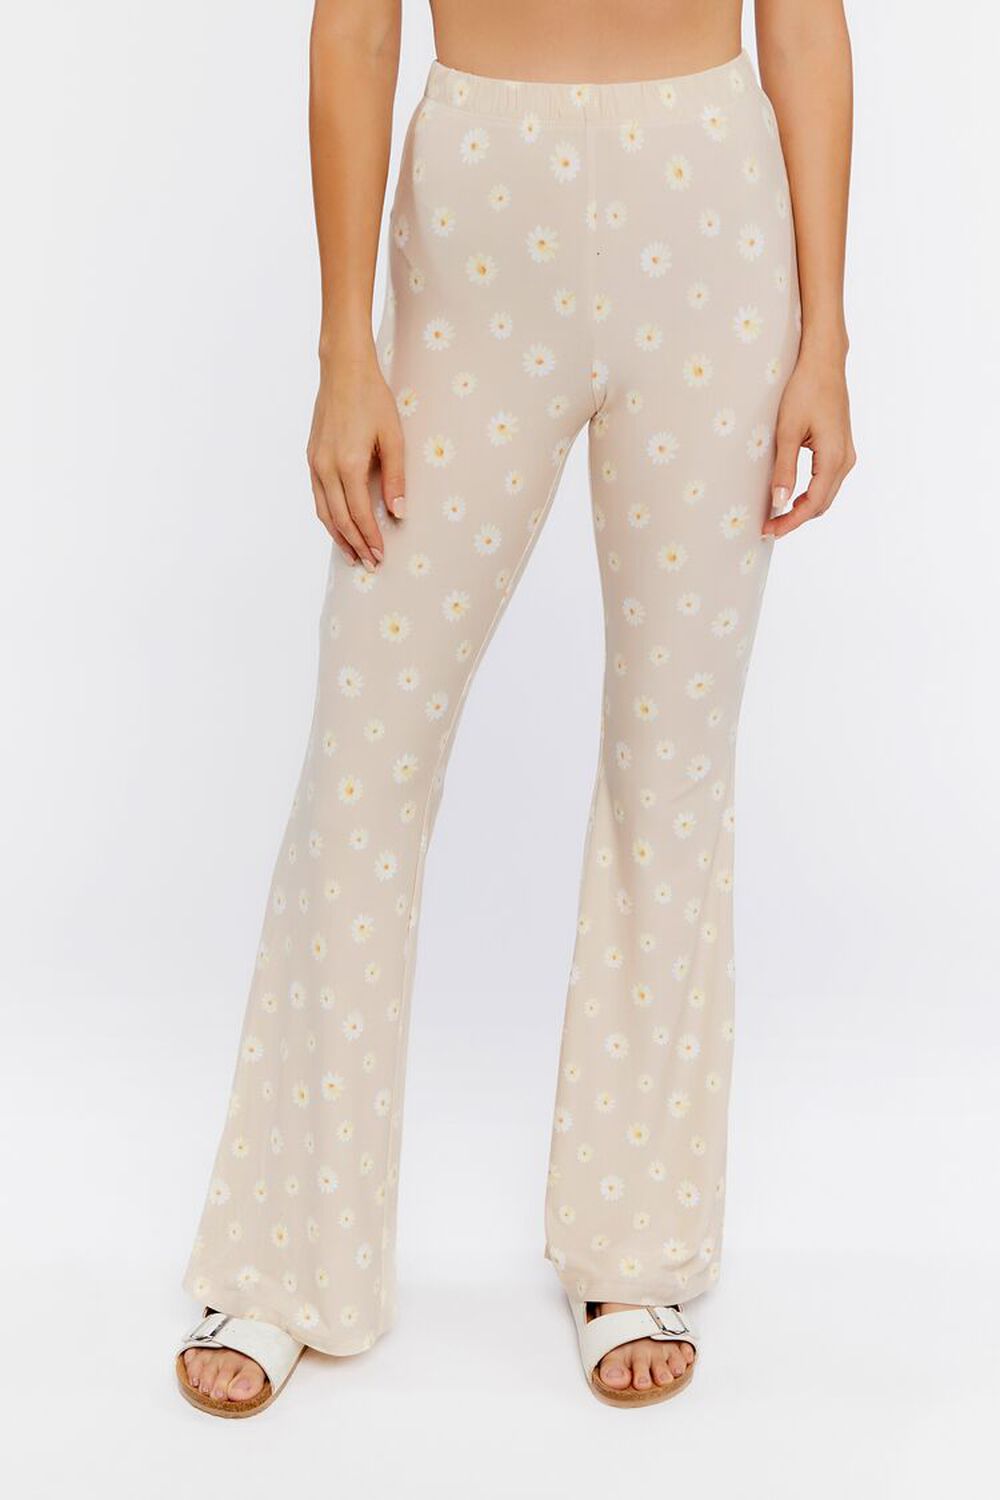 Floral Print High-Rise Flare Pants, image 2